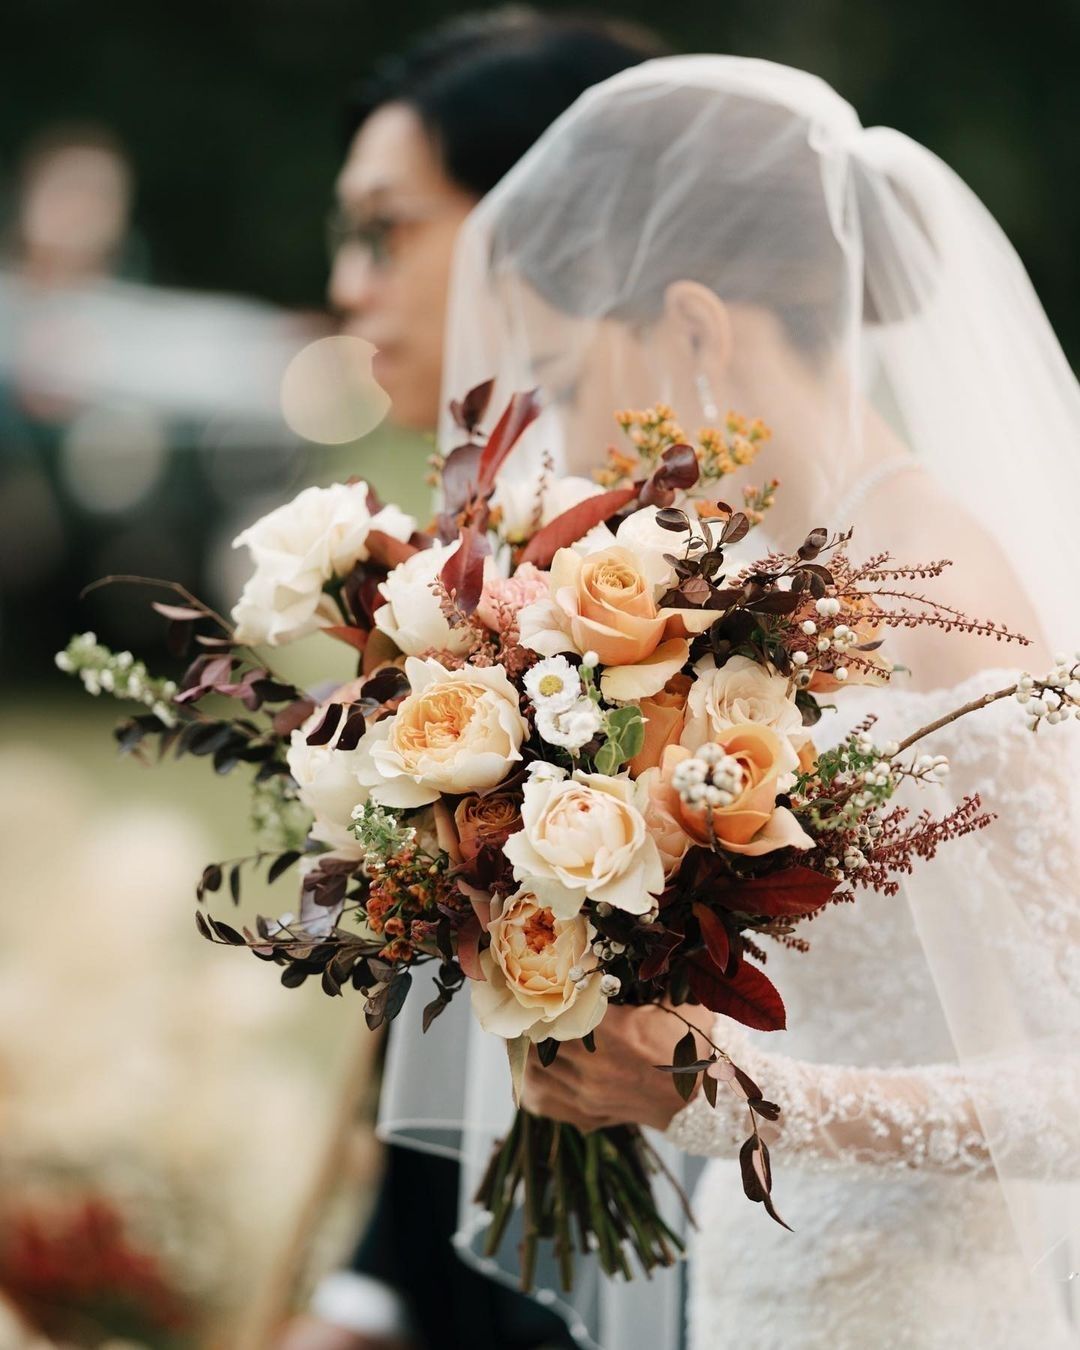 how to preserve wedding bouquet with wild flowers2